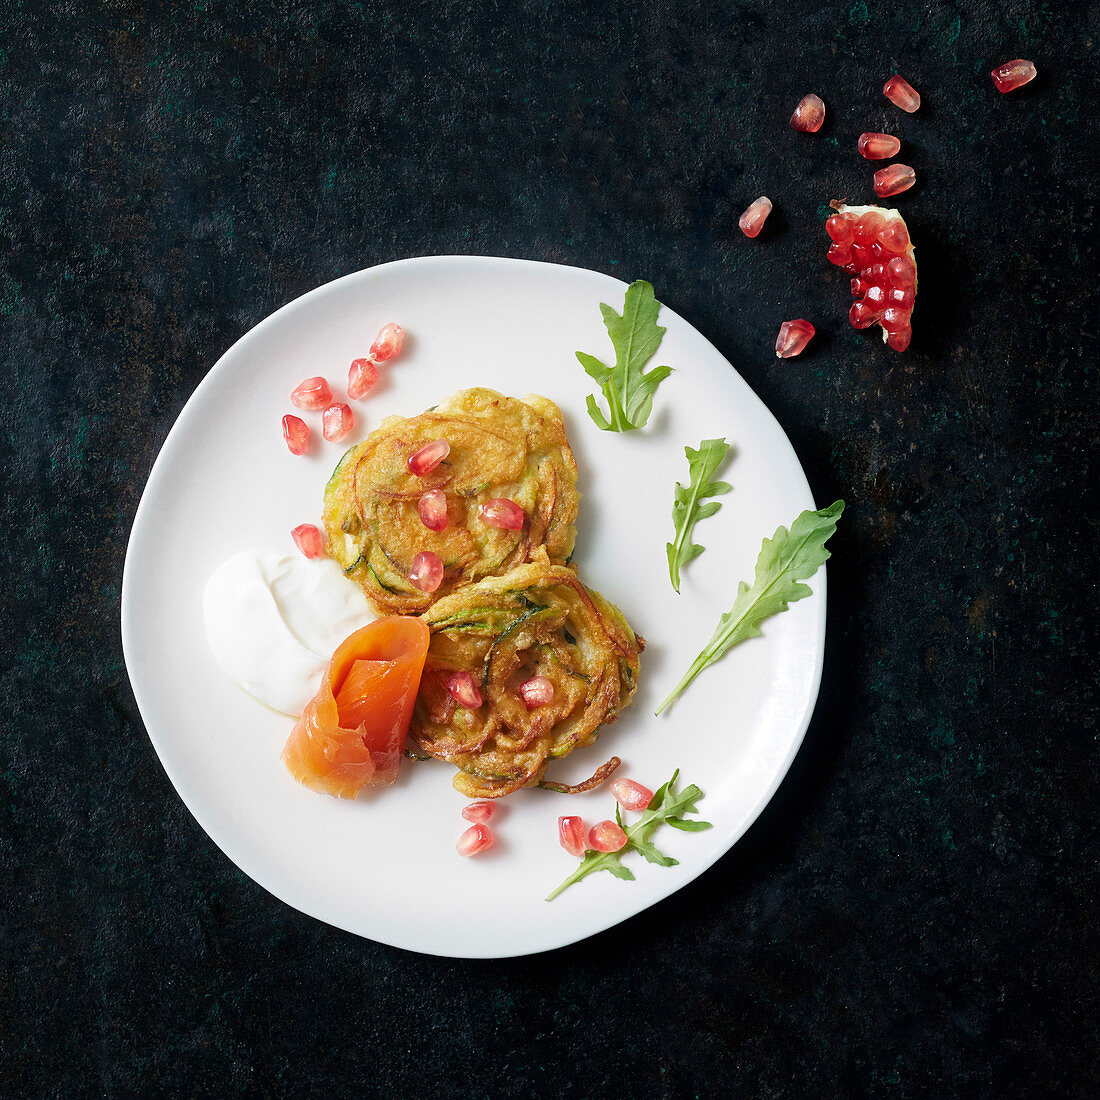 Zoodle pancakes with smoked salmon and pomegranate seeds